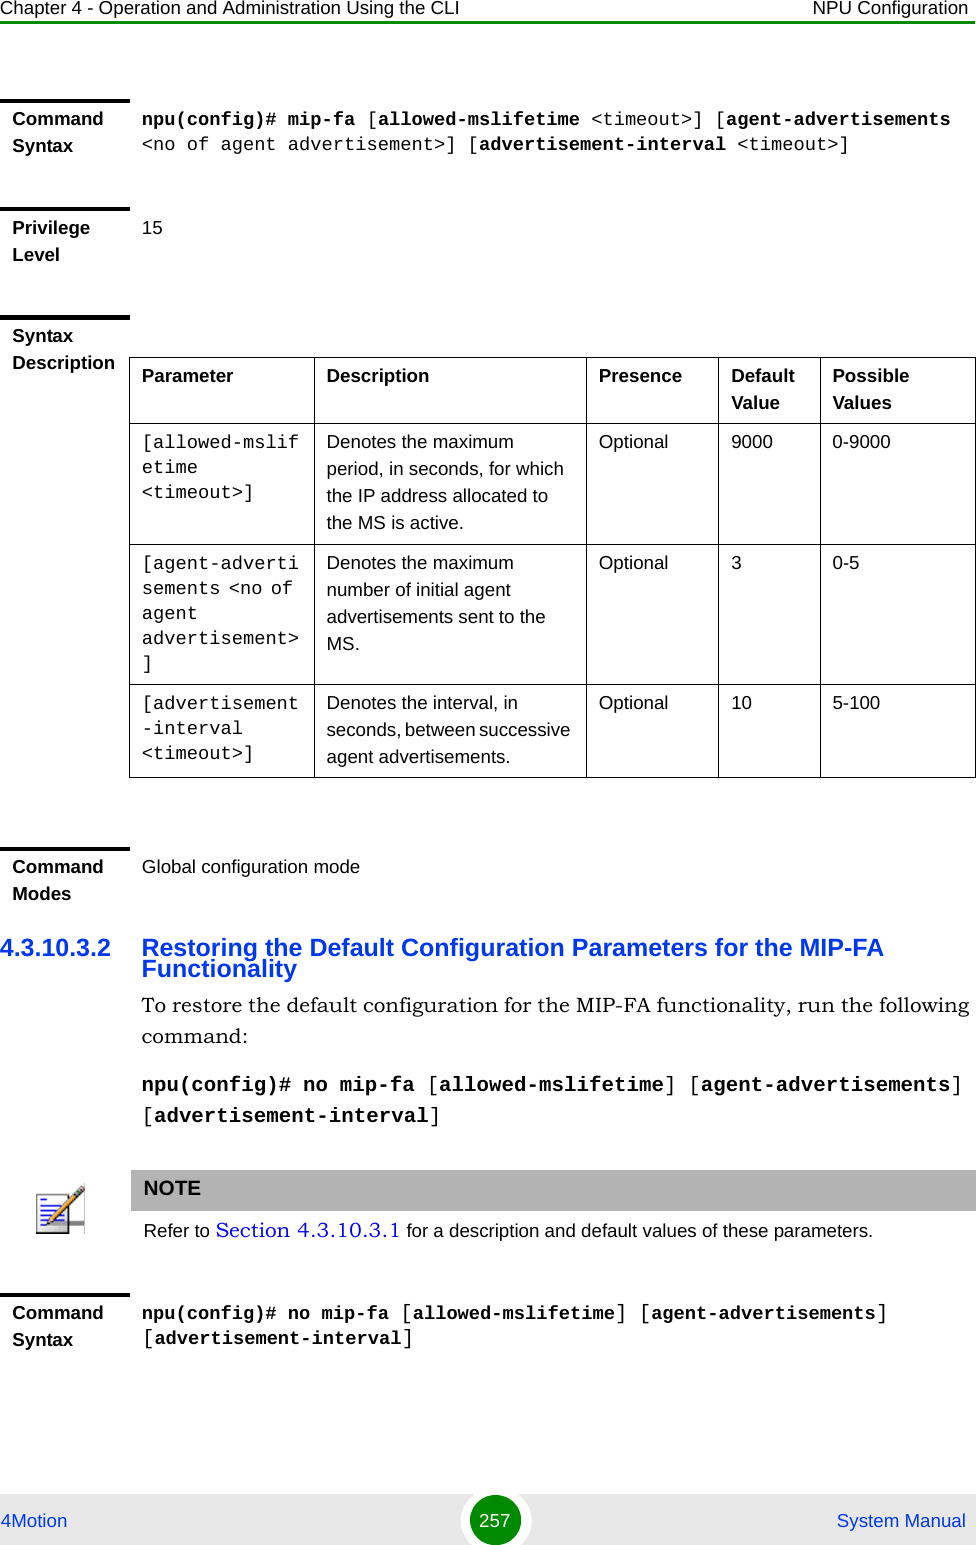 Chapter 4 - Operation and Administration Using the CLI NPU Configuration4Motion 257  System Manual4.3.10.3.2 Restoring the Default Configuration Parameters for the MIP-FA FunctionalityTo restore the default configuration for the MIP-FA functionality, run the following command:npu(config)# no mip-fa [allowed-mslifetime] [agent-advertisements] [advertisement-interval]Command Syntaxnpu(config)# mip-fa [allowed-mslifetime &lt;timeout&gt;] [agent-advertisements &lt;no of agent advertisement&gt;] [advertisement-interval &lt;timeout&gt;]Privilege Level15Syntax Description Parameter Description Presence Default ValuePossible Values[allowed-mslifetime &lt;timeout&gt;]Denotes the maximum period, in seconds, for which the IP address allocated to the MS is active.Optional 9000 0-9000[agent-advertisements &lt;no of agent advertisement&gt;]Denotes the maximum number of initial agent advertisements sent to the MS.Optional 3 0-5[advertisement-interval &lt;timeout&gt;]Denotes the interval, in seconds, between successive agent advertisements.Optional 10 5-100Command ModesGlobal configuration modeNOTERefer to Section 4.3.10.3.1 for a description and default values of these parameters. Command Syntaxnpu(config)# no mip-fa [allowed-mslifetime] [agent-advertisements] [advertisement-interval]